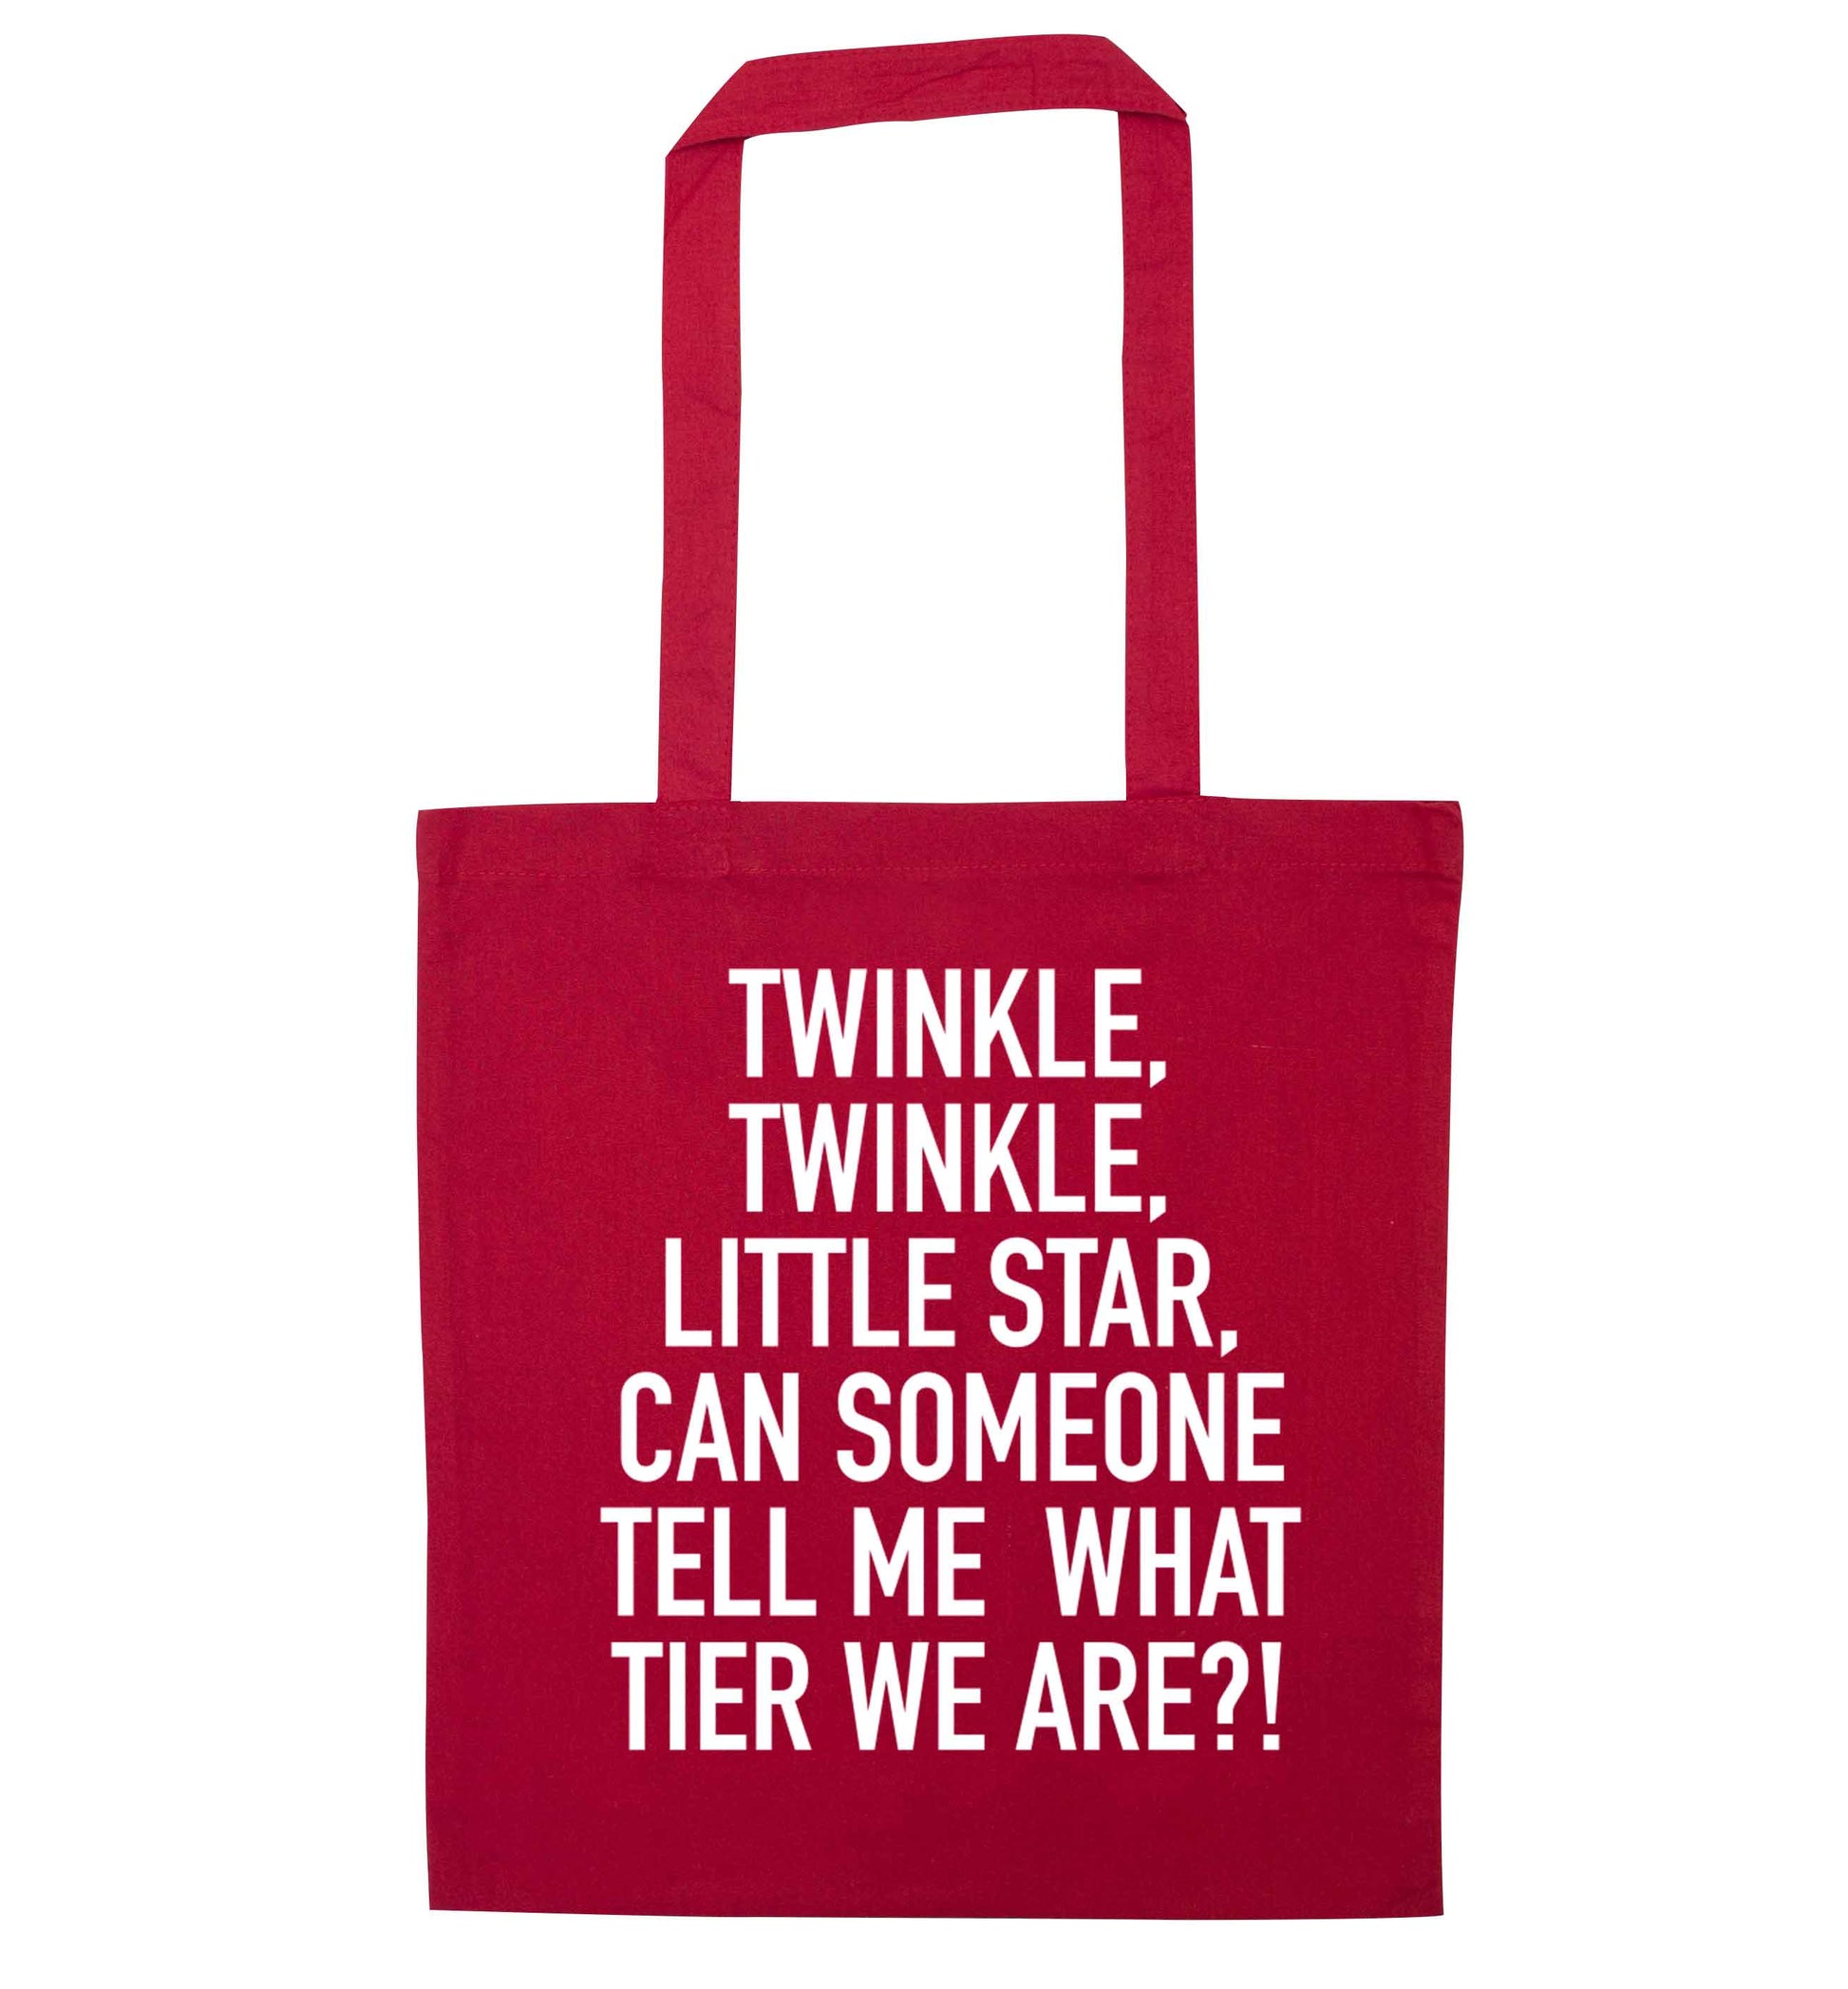 Twinkle twinkle, little star does anyone know what tier we are? red tote bag